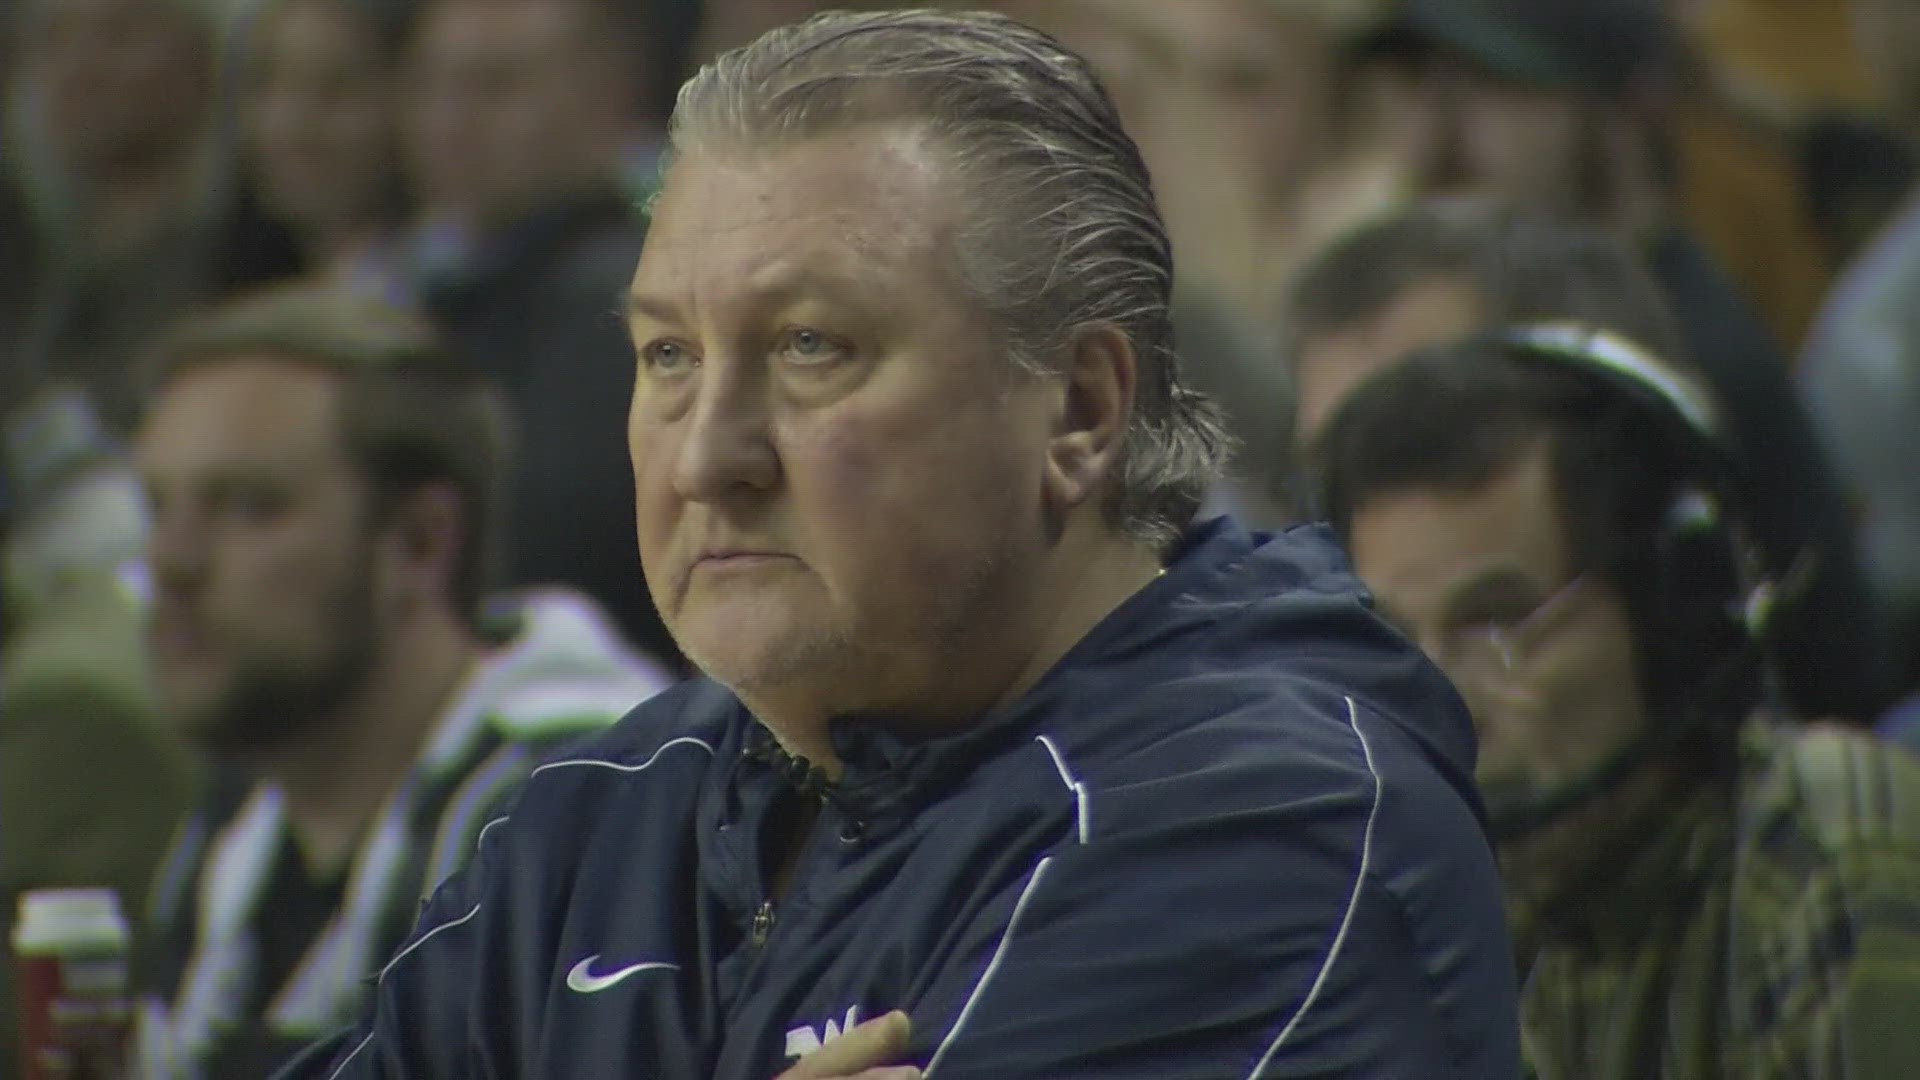 Huggins reportedly threatened legal action against WVU demanding to be reinstated, saying he never resigned.